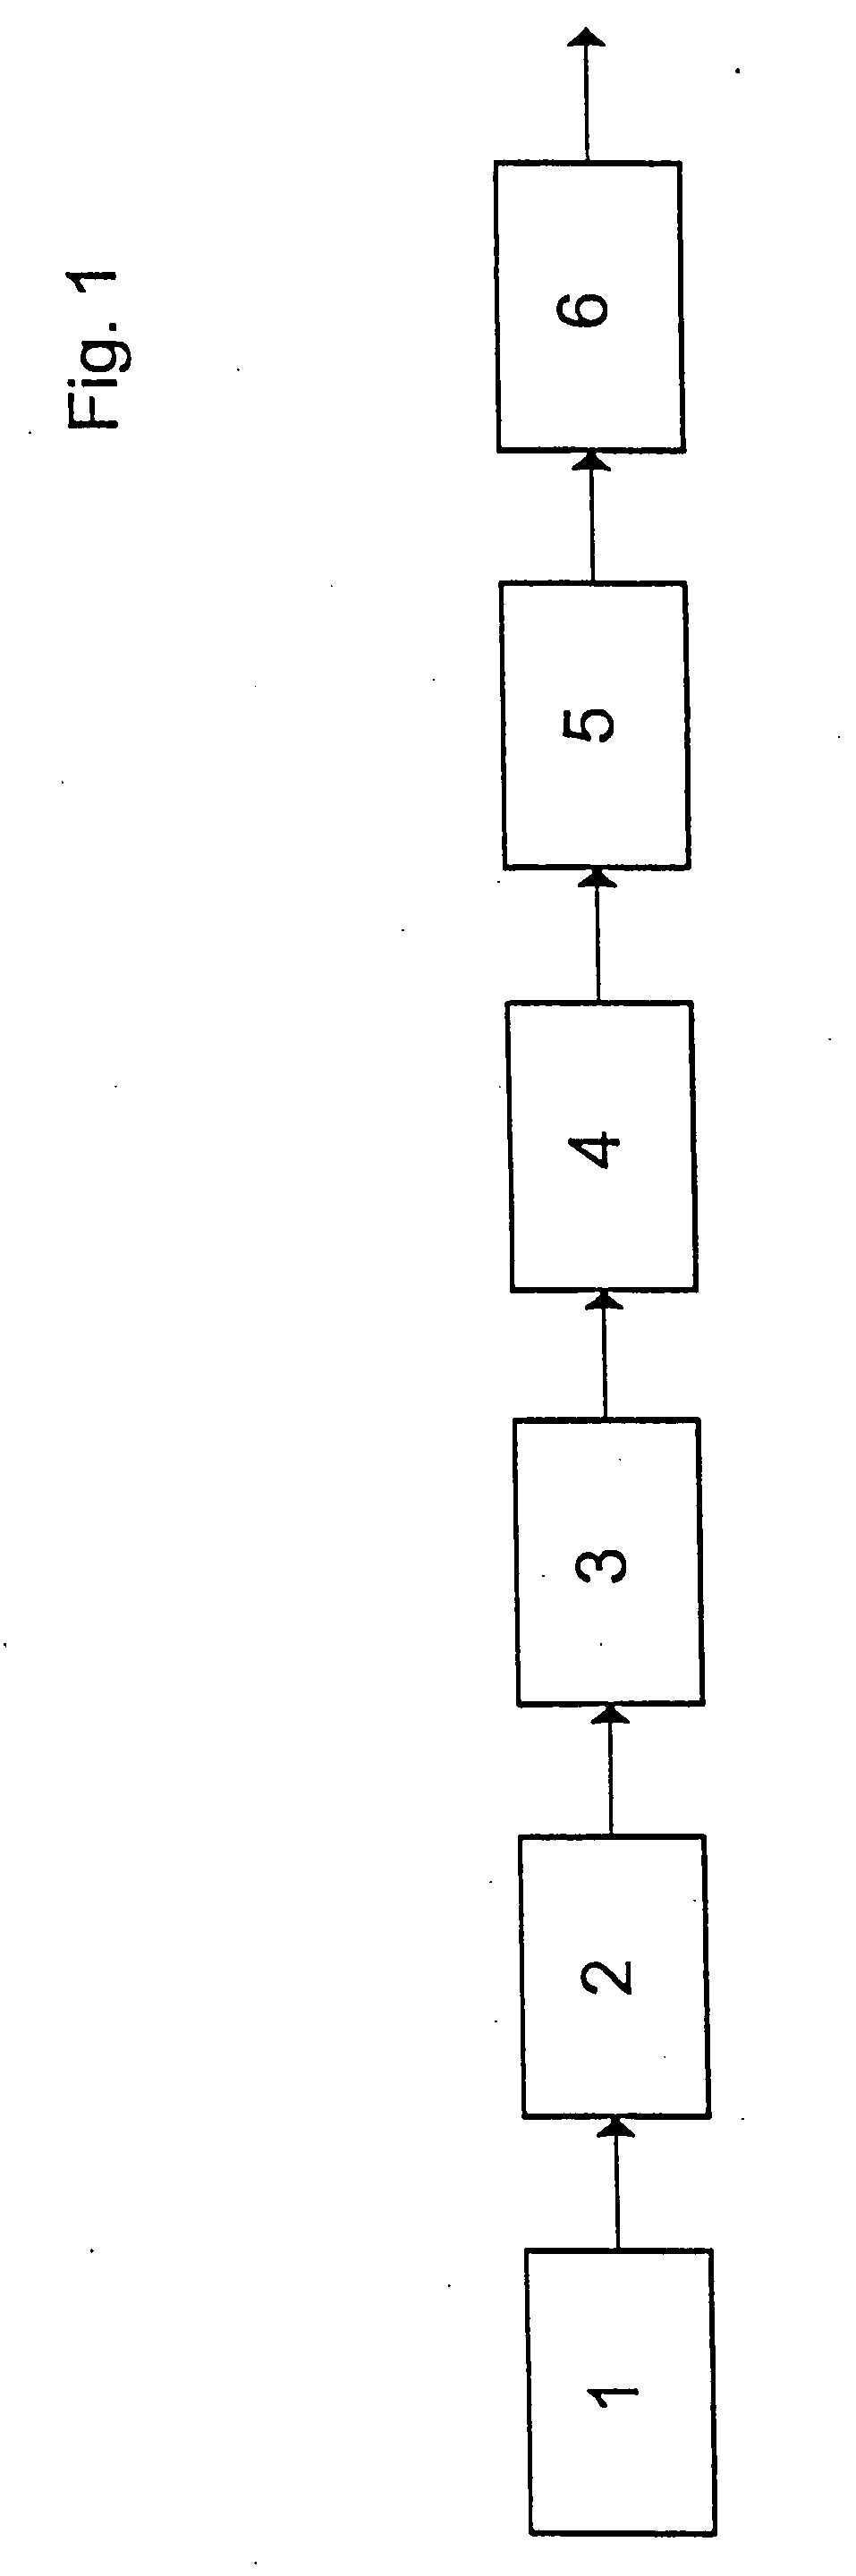 Gasification method and device for producing synthesis gases by partial oxidation of fuels containing ash at elevated pressure with partial quenching of the crude gas and waste heat recovery